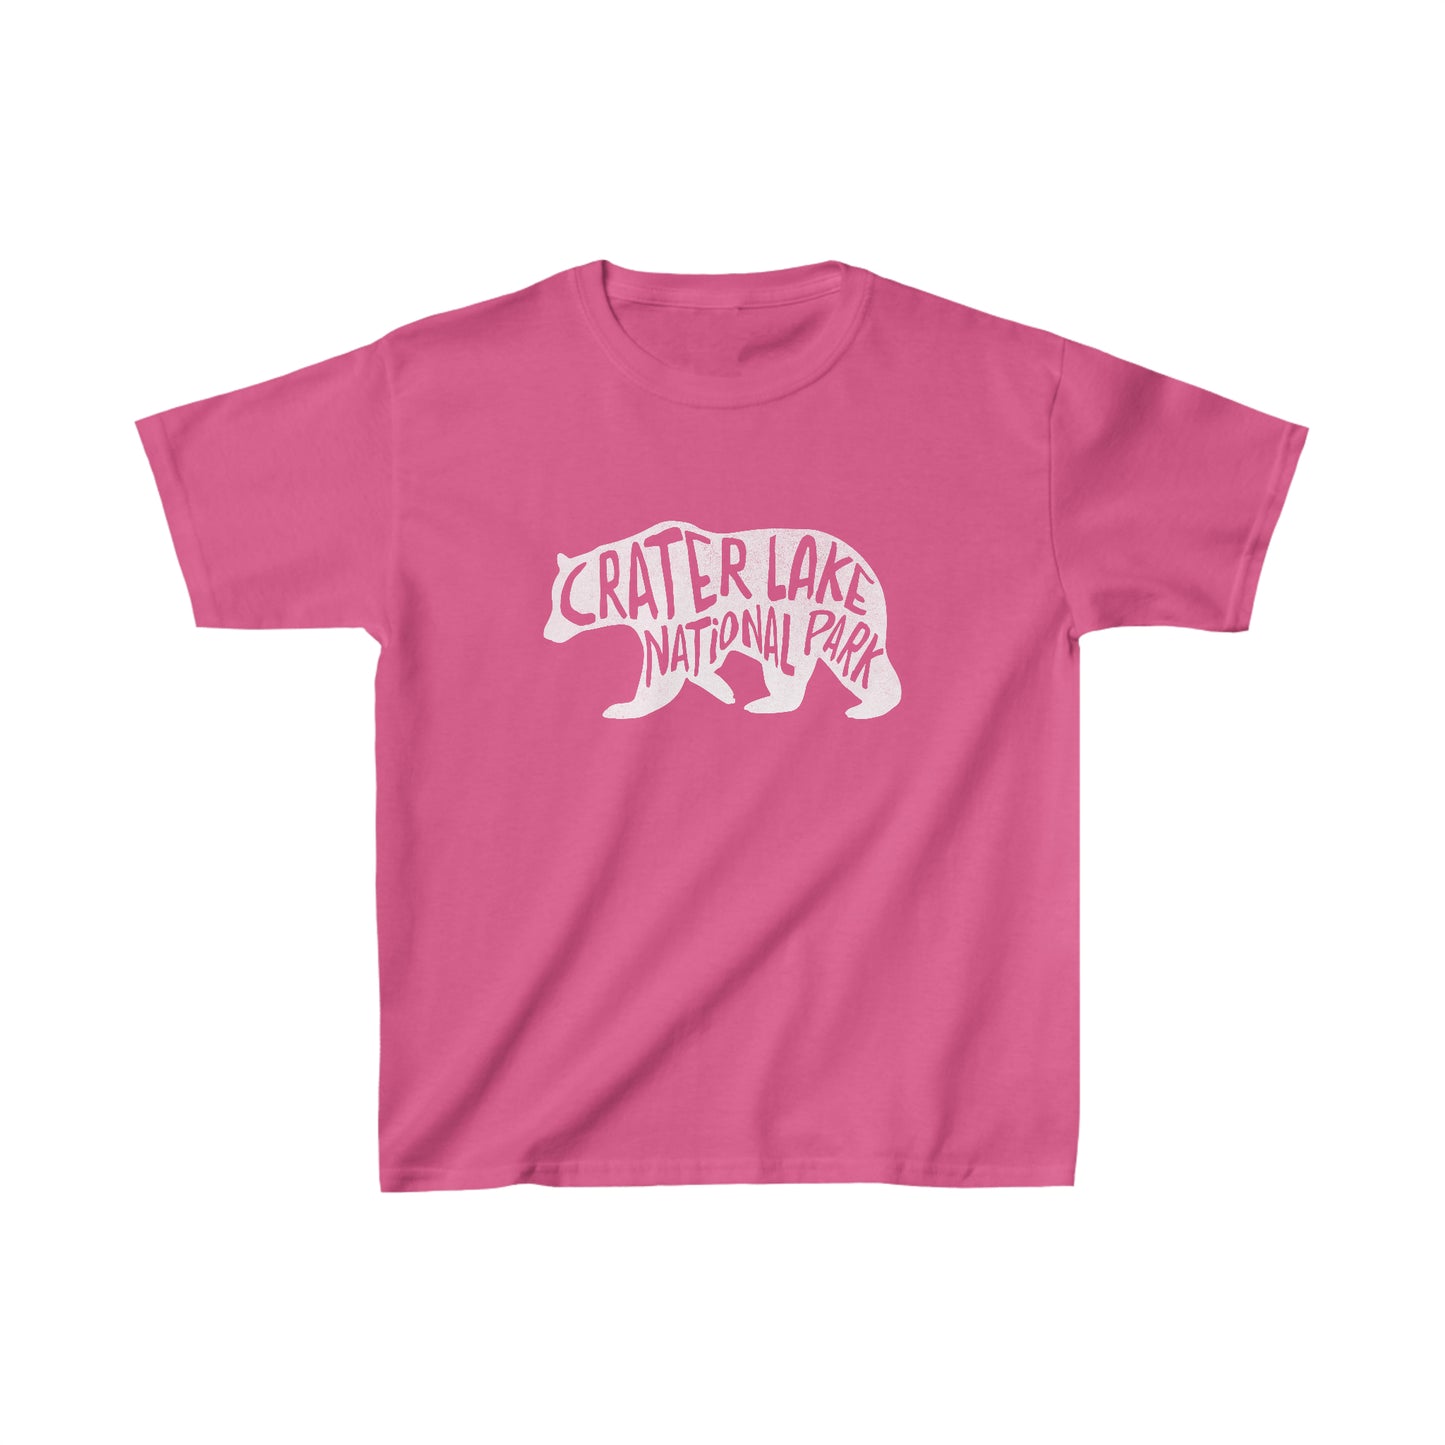 Crater Lake National Park Child T-Shirt - Bear Chunky Text